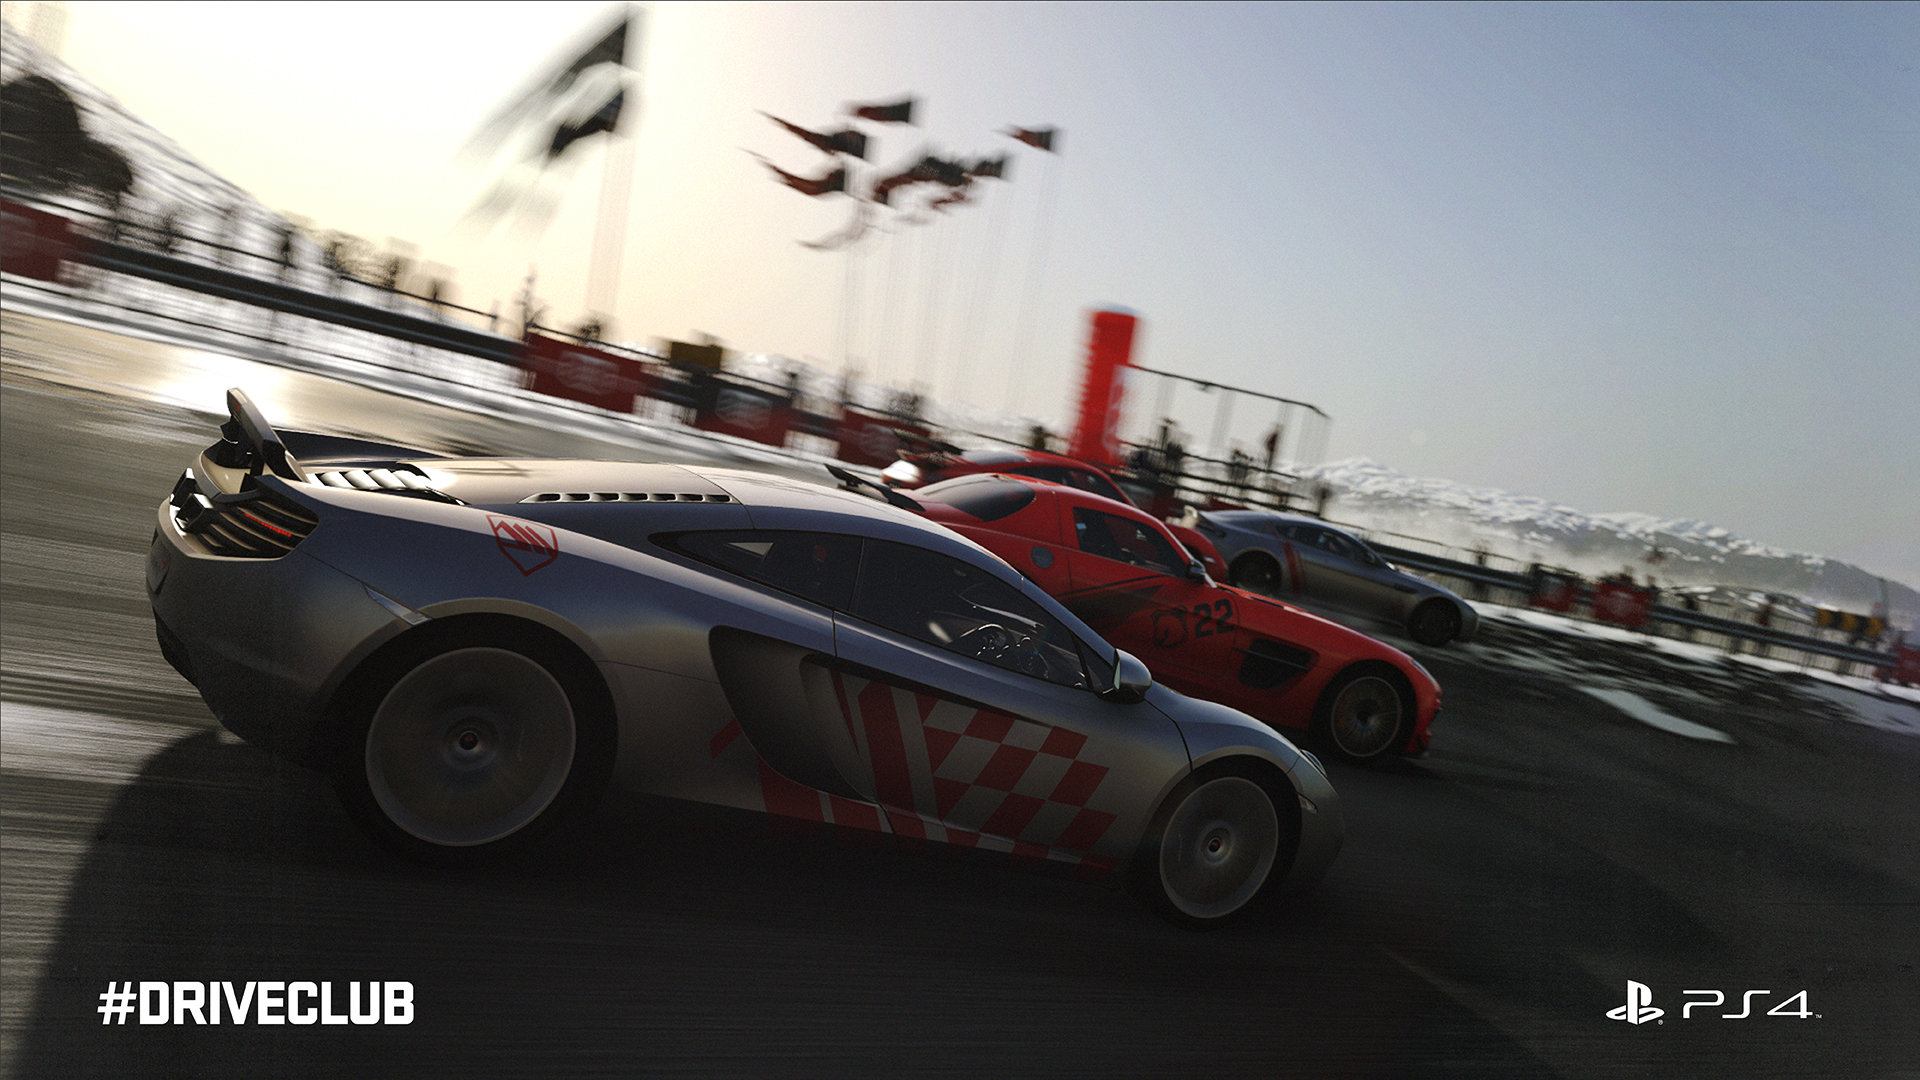 “Driveclub” Free for PS Plus Users Delayed - Postponed to Ease Online Traffic